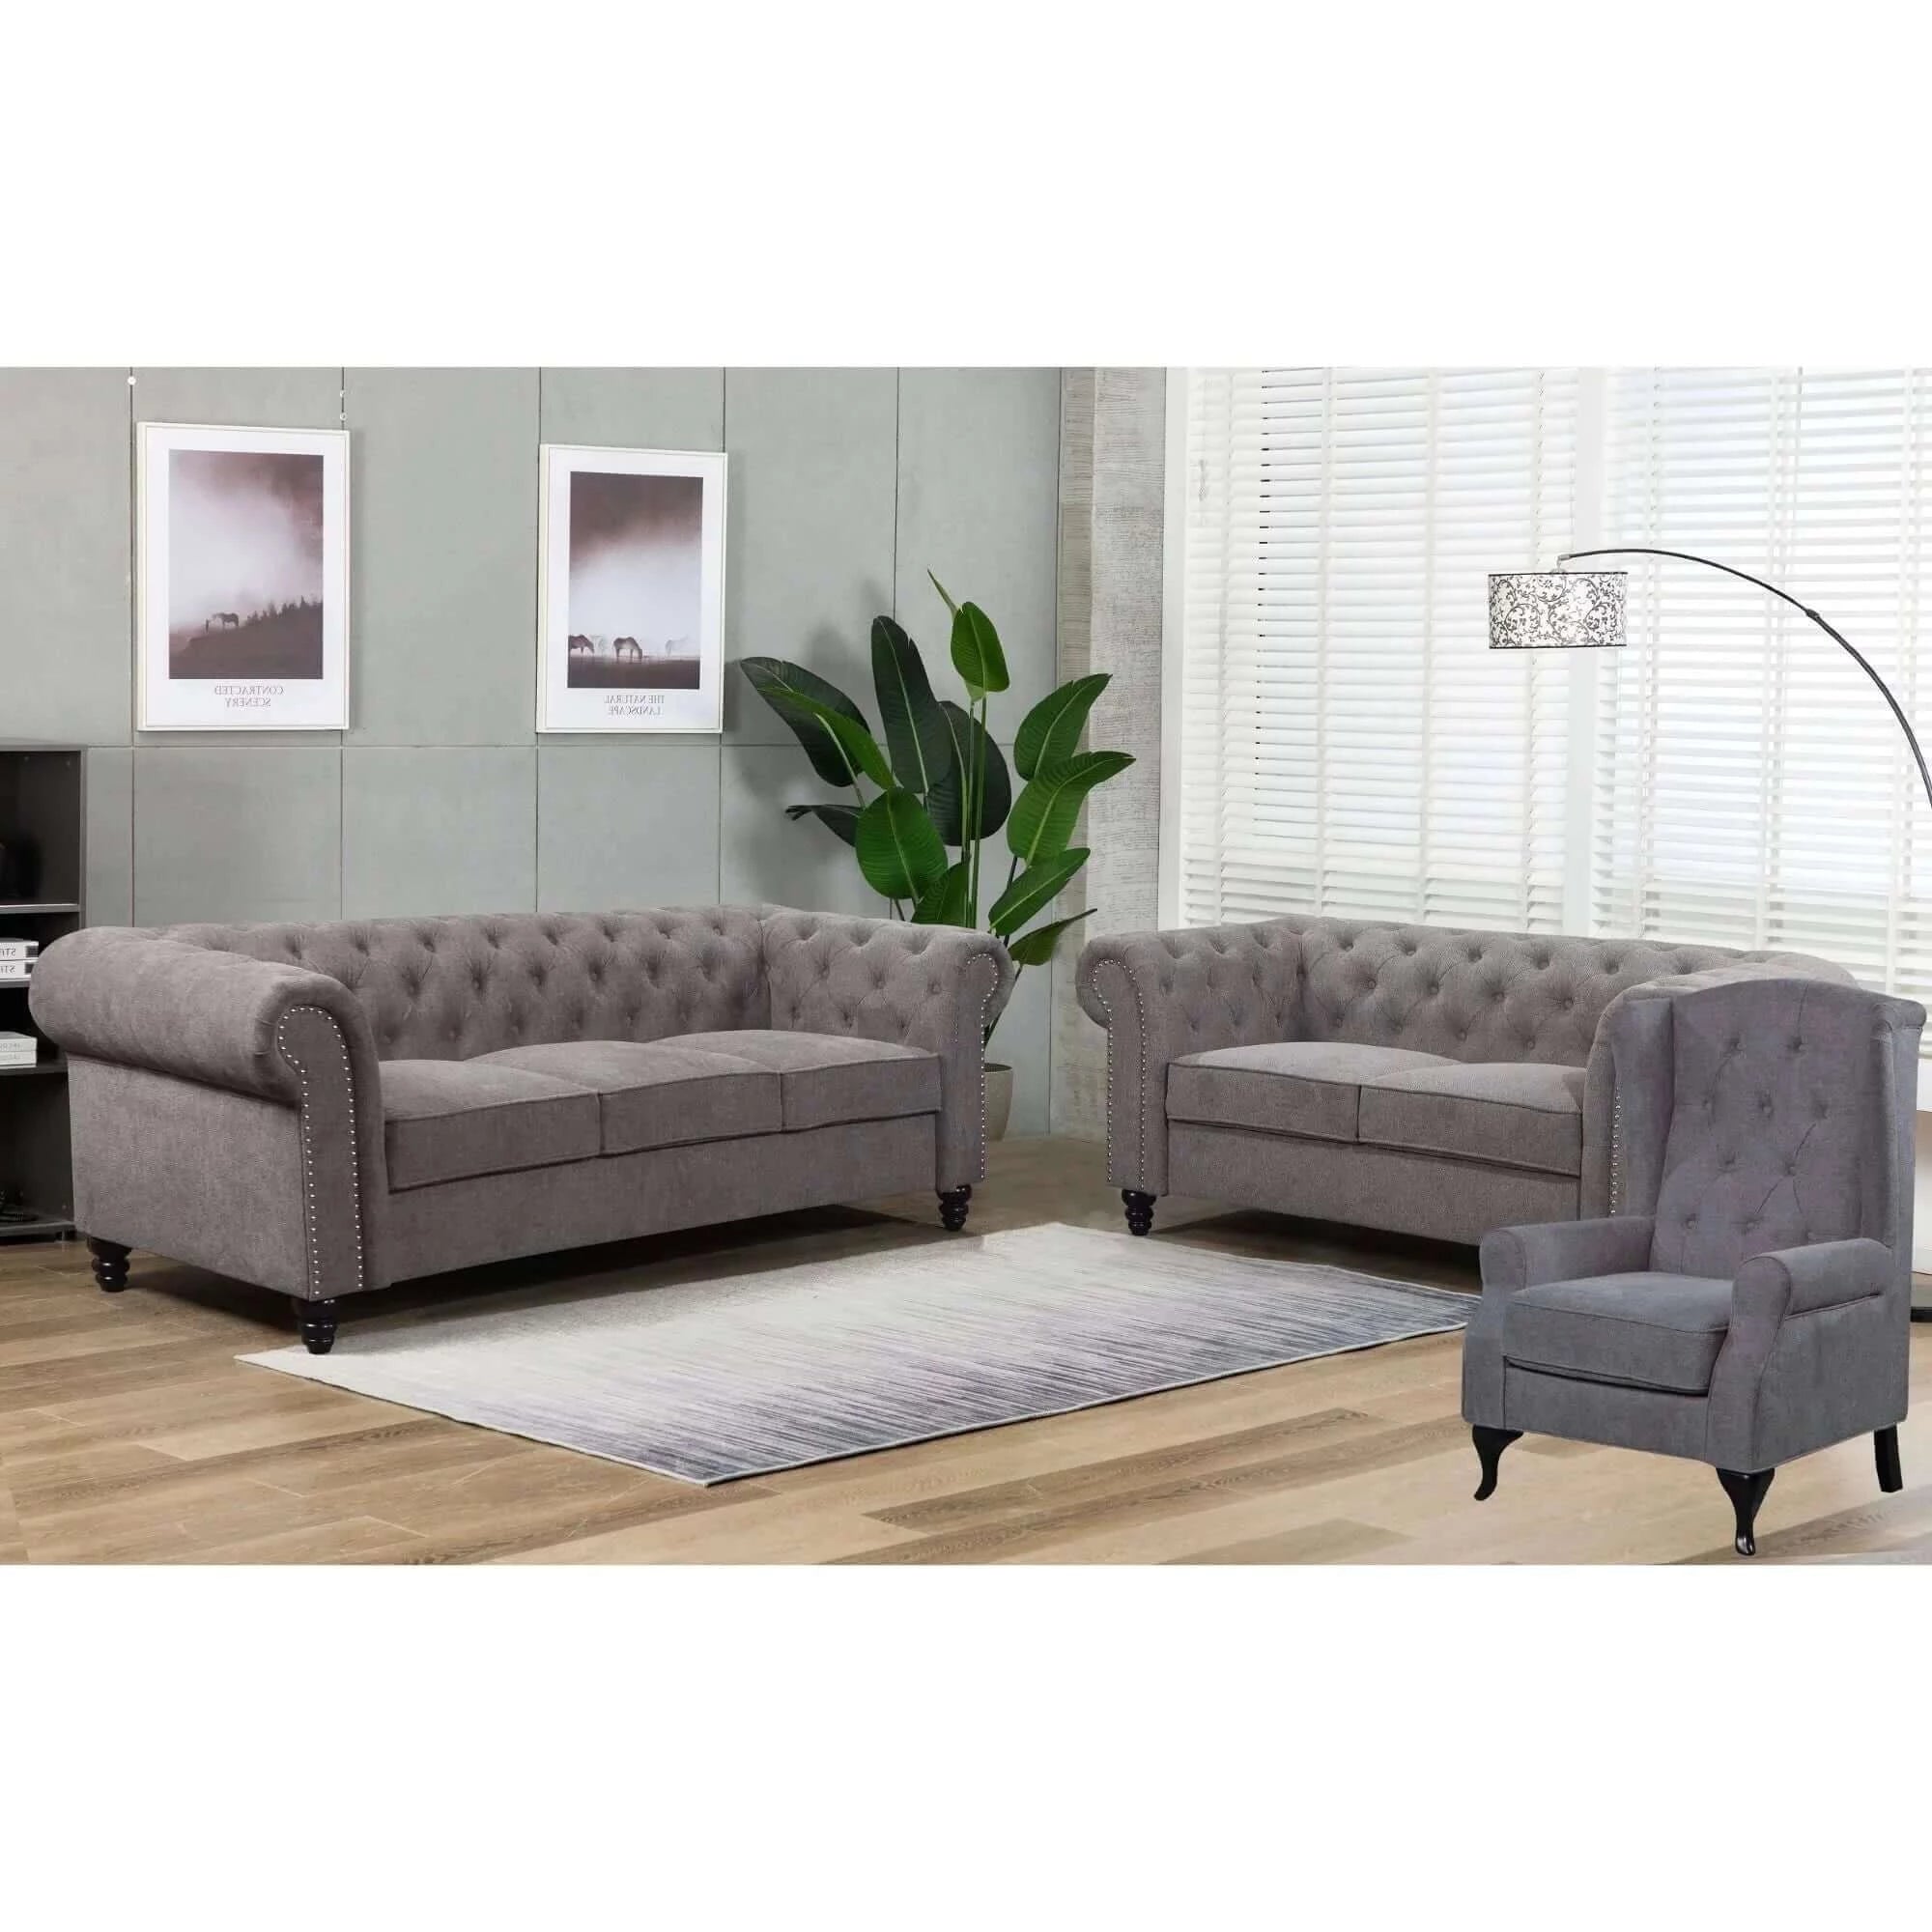 Buy mellowly 3 seater sofa fabric uplholstered chesterfield lounge couch - grey - upinteriors-Upinteriors